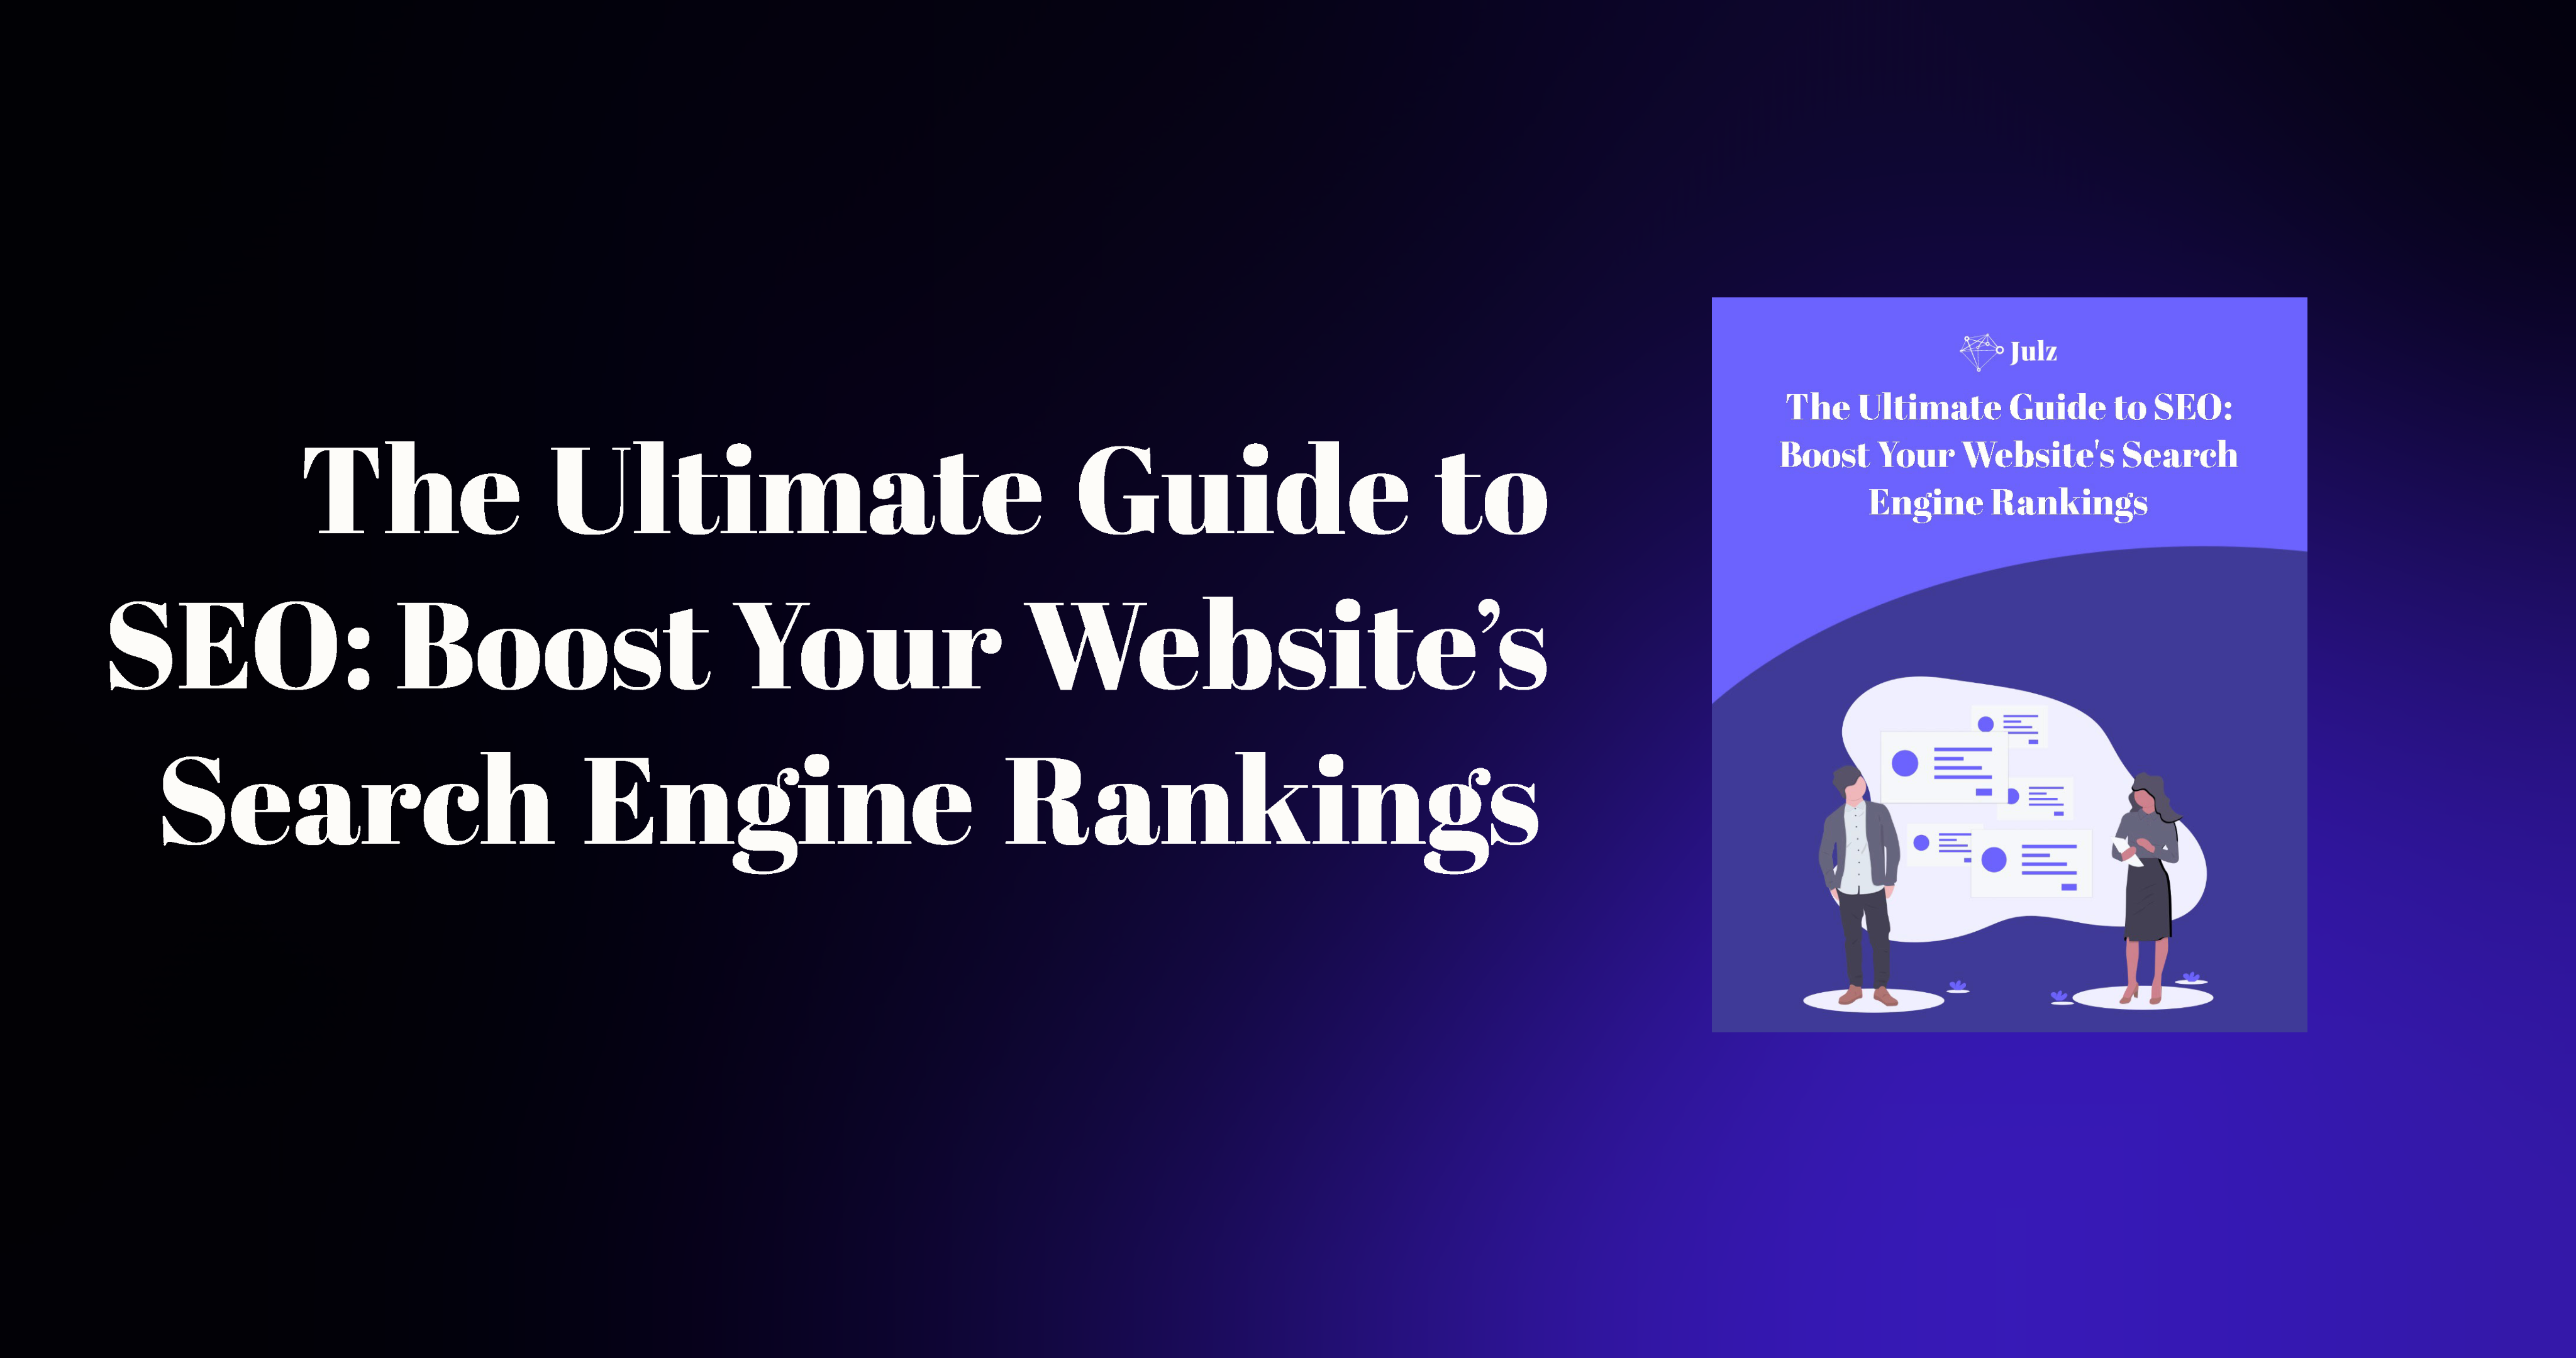 The Ultimate Basic Guide to SEO - Boost Your Website's Search Engine Rankings feature-image